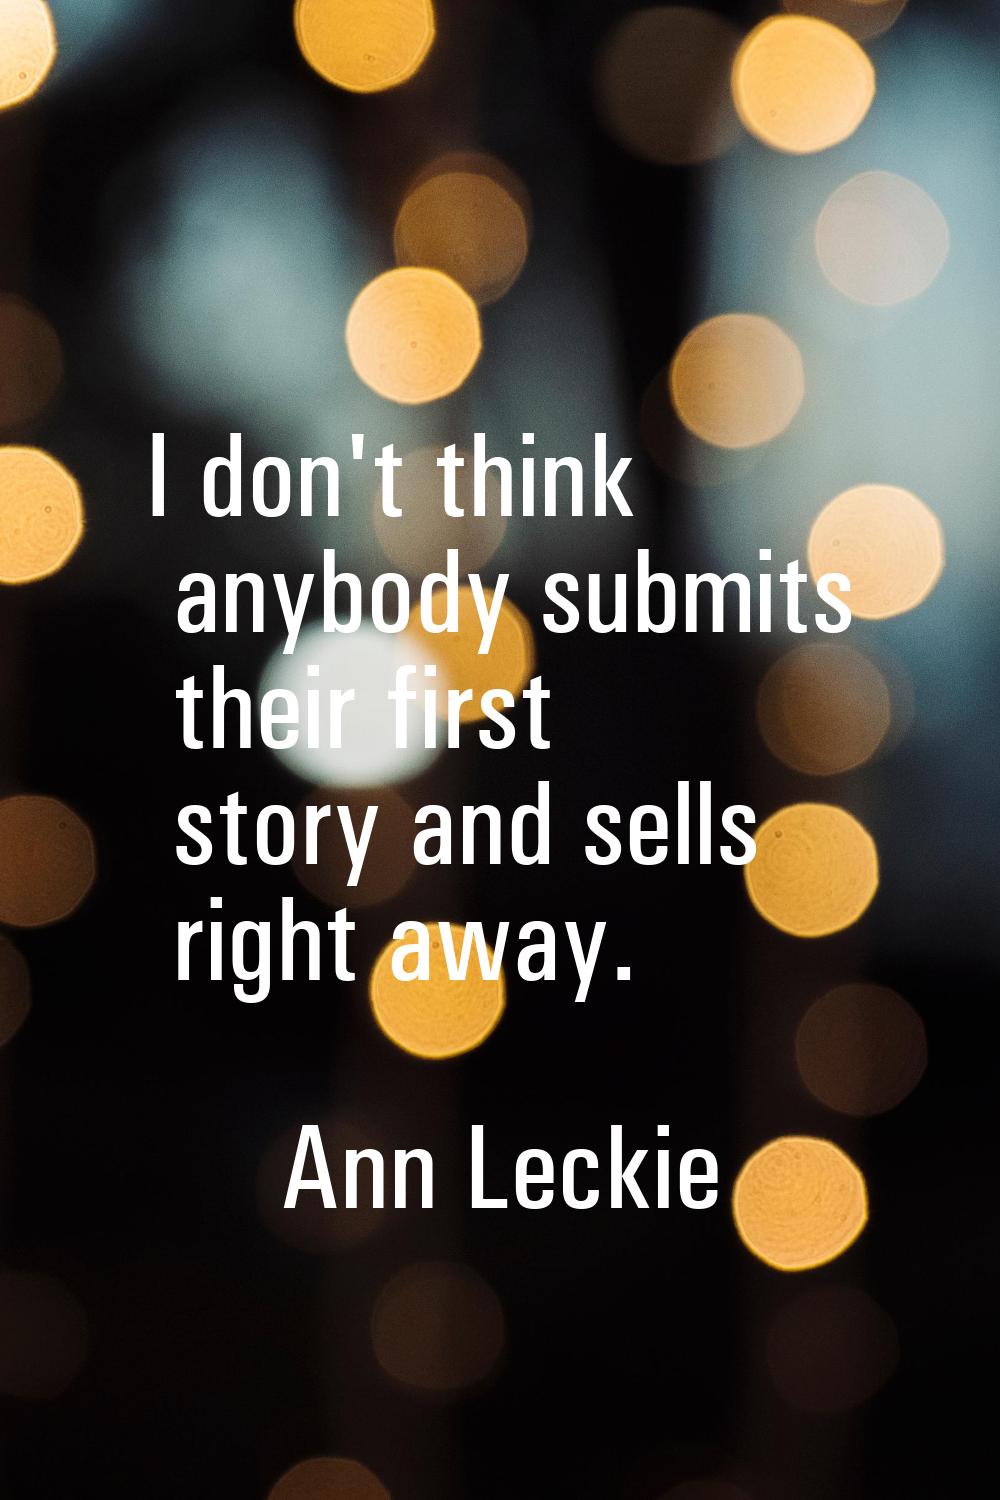 I don't think anybody submits their first story and sells right away.